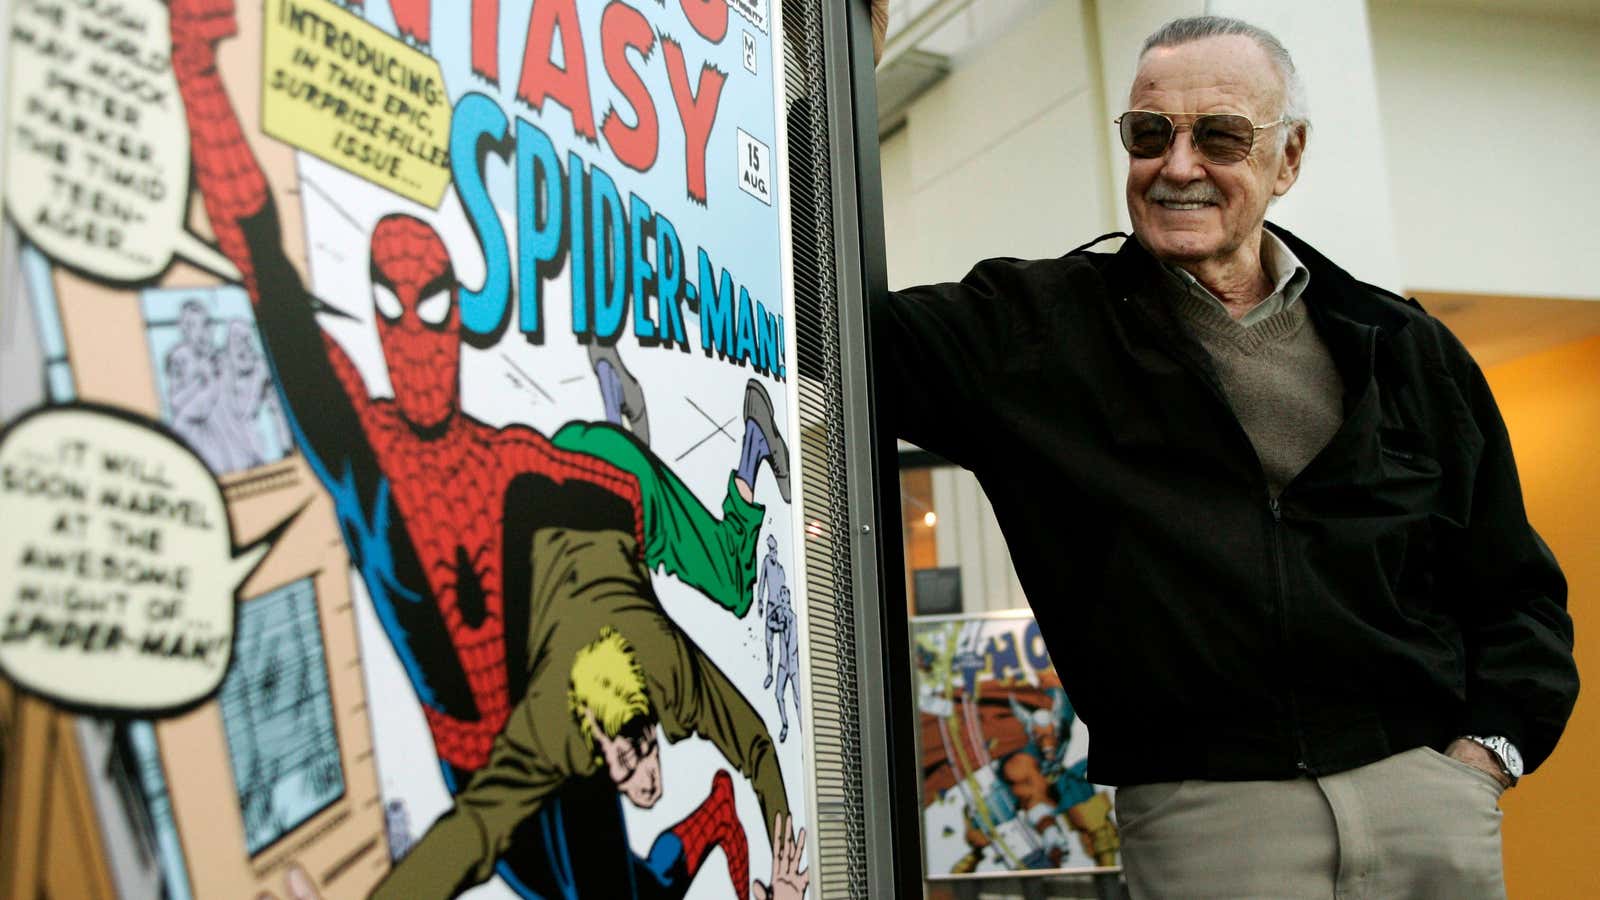 For Lee, “Excelsior!” was a lot more than just a clever catchphrase.